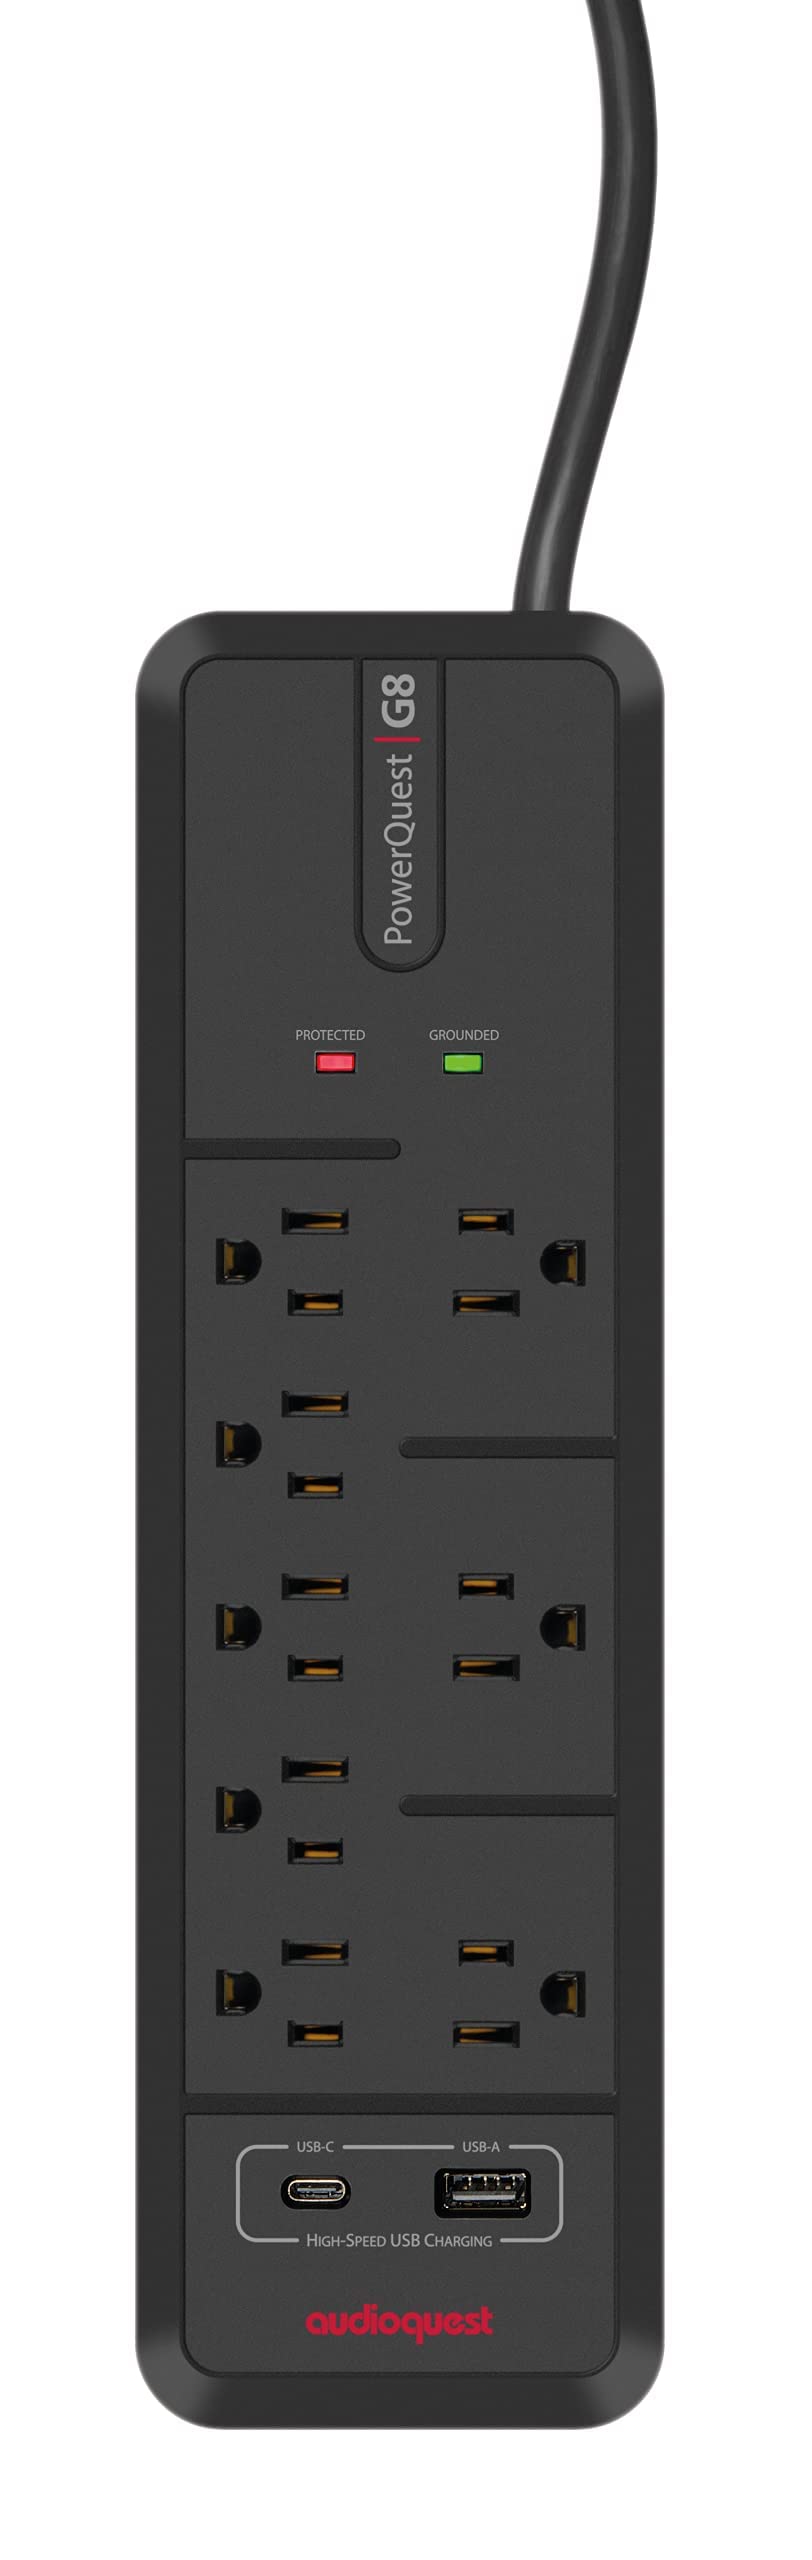 AudioQuest PowerQuest G8 – 8-Outlet Surge Protector with USB-A and USB-C Charging Ports - Perfect for TV, AV Receiver, Xbox, Playstation, Soundbar, Computer, and Home Office